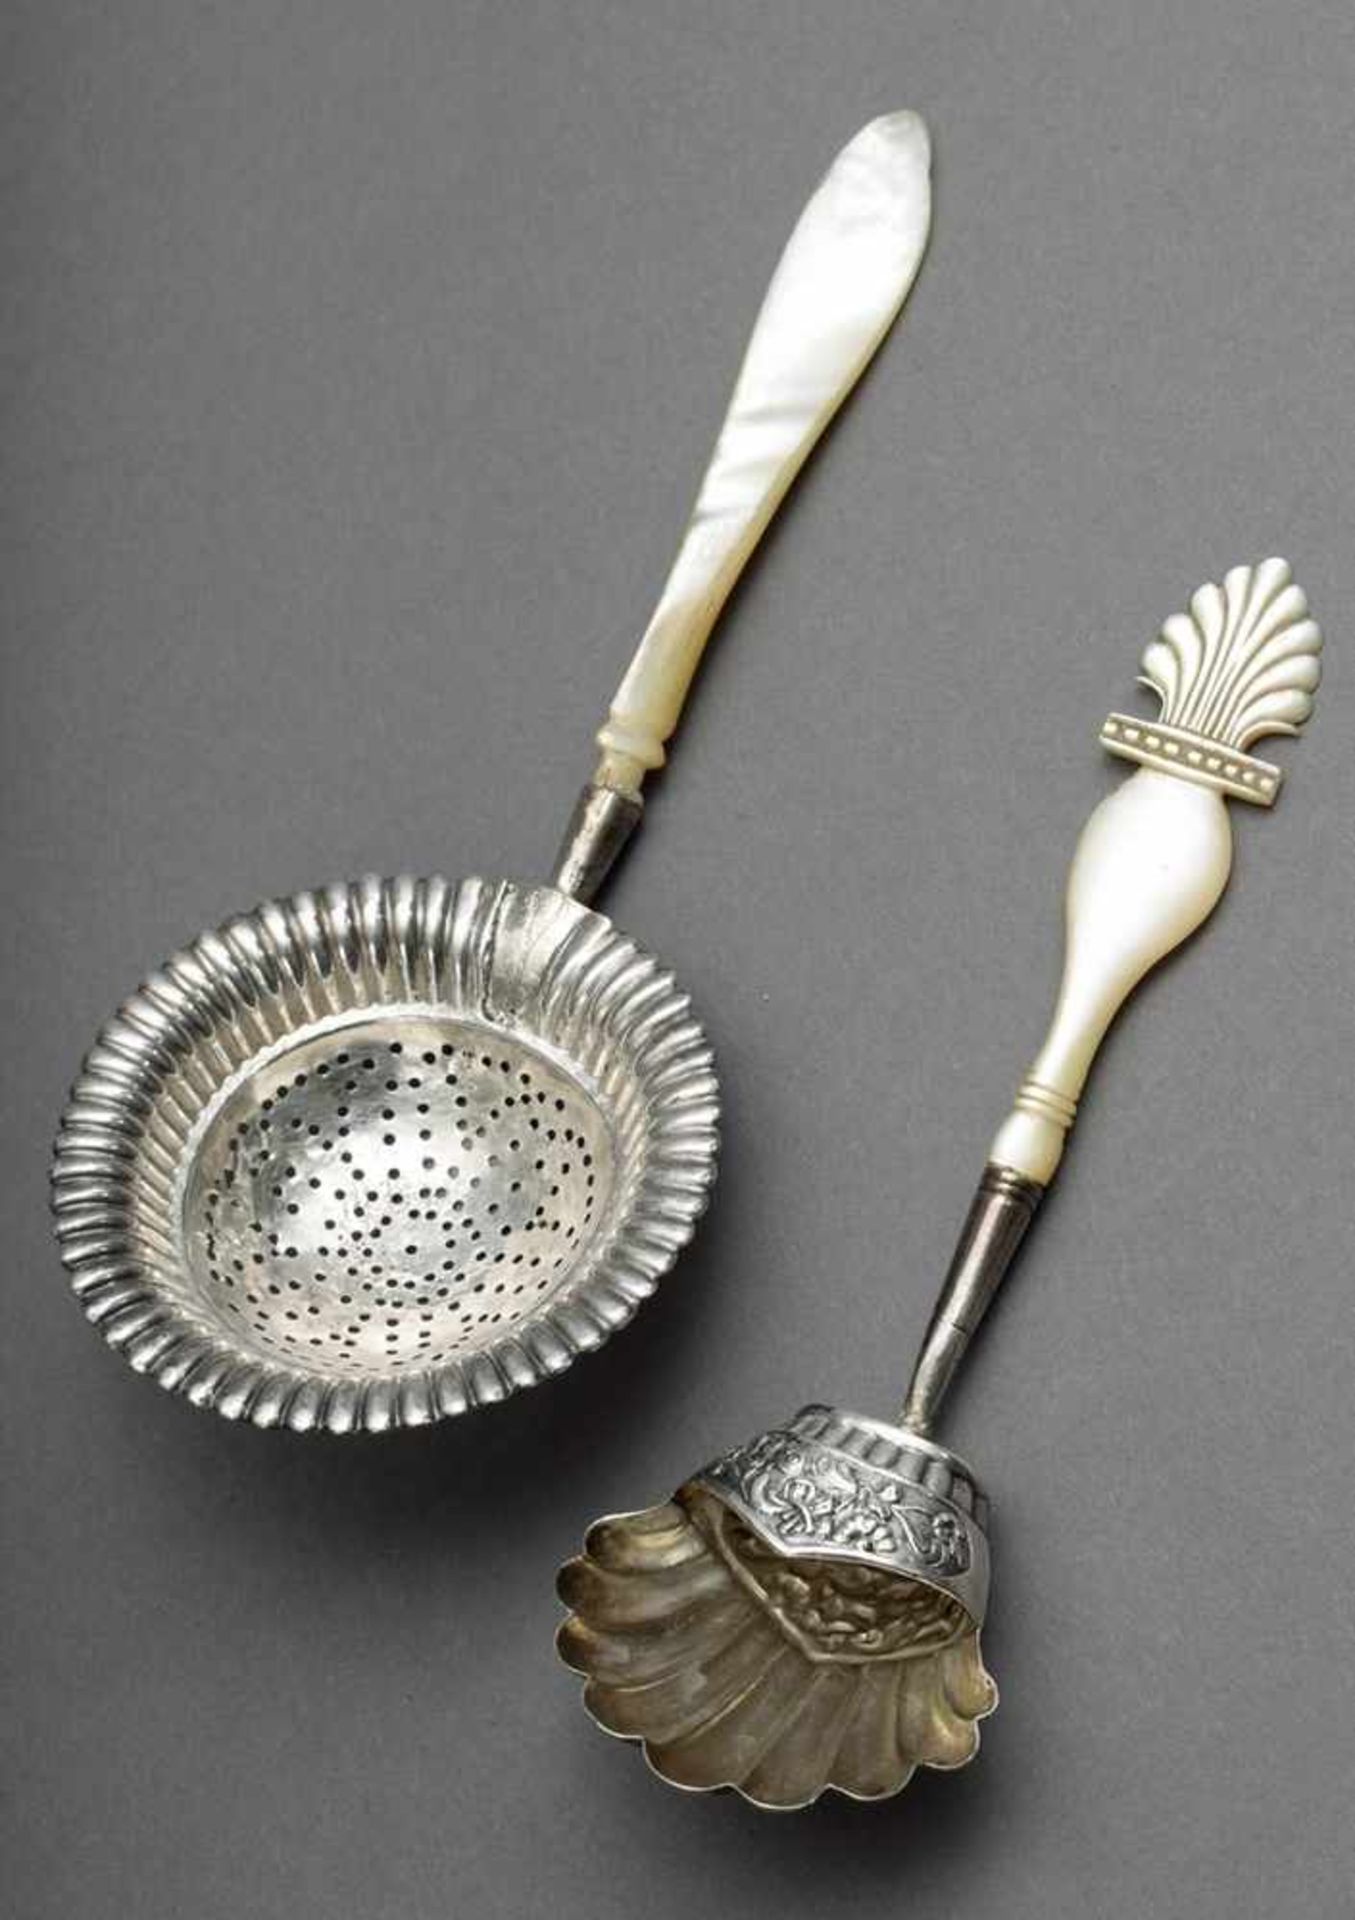 2 Various parts cutlery: chute and strainer with mother-of-pearl handles, 19th century, silver, l.